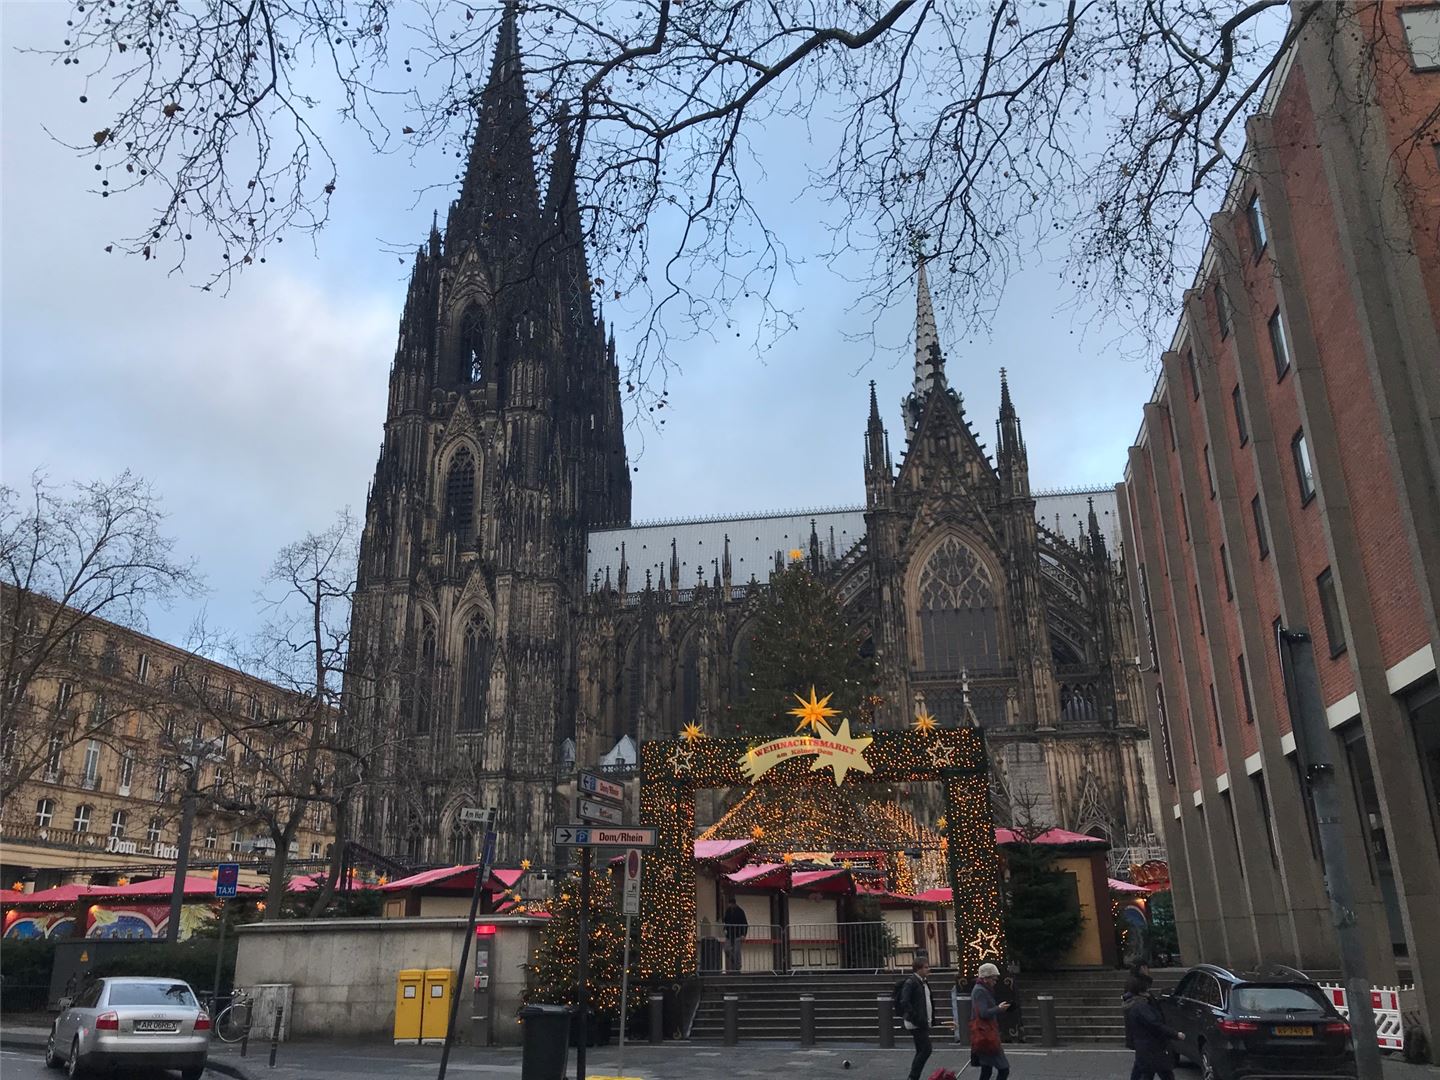 Exploring Europe’s Christmas Markets on an AmaWaterways River Cruise